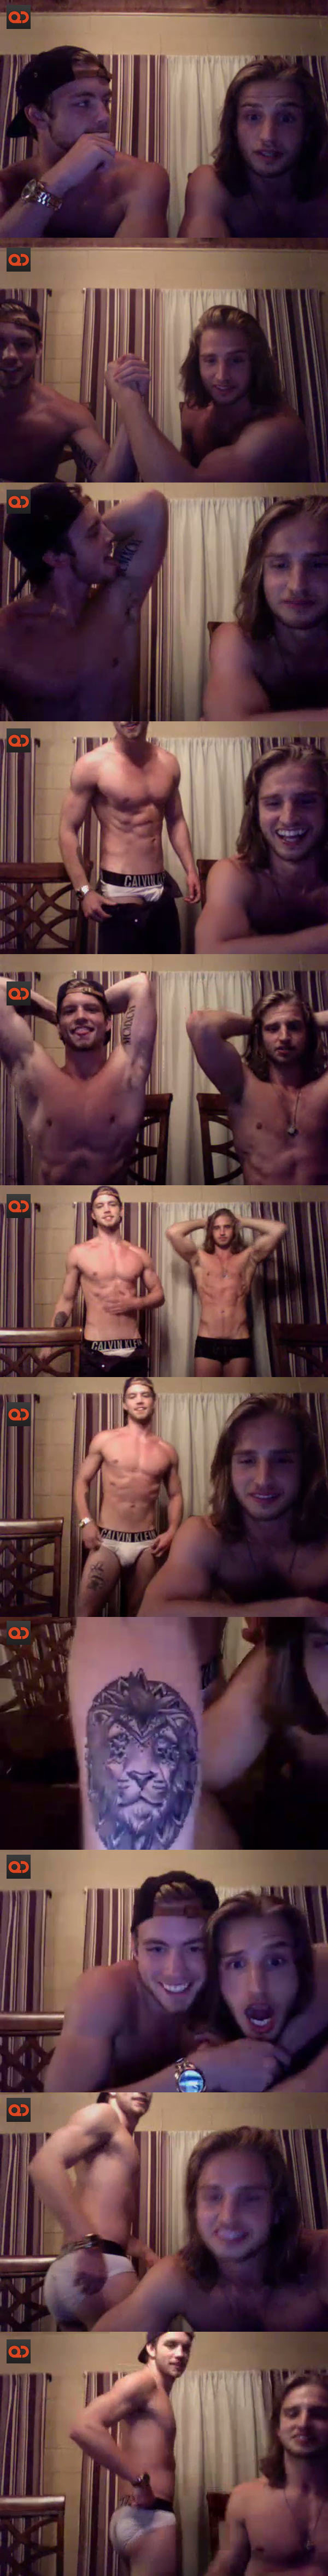 qc-exposed-cock_dustin_mcneer_from_antm-collage03